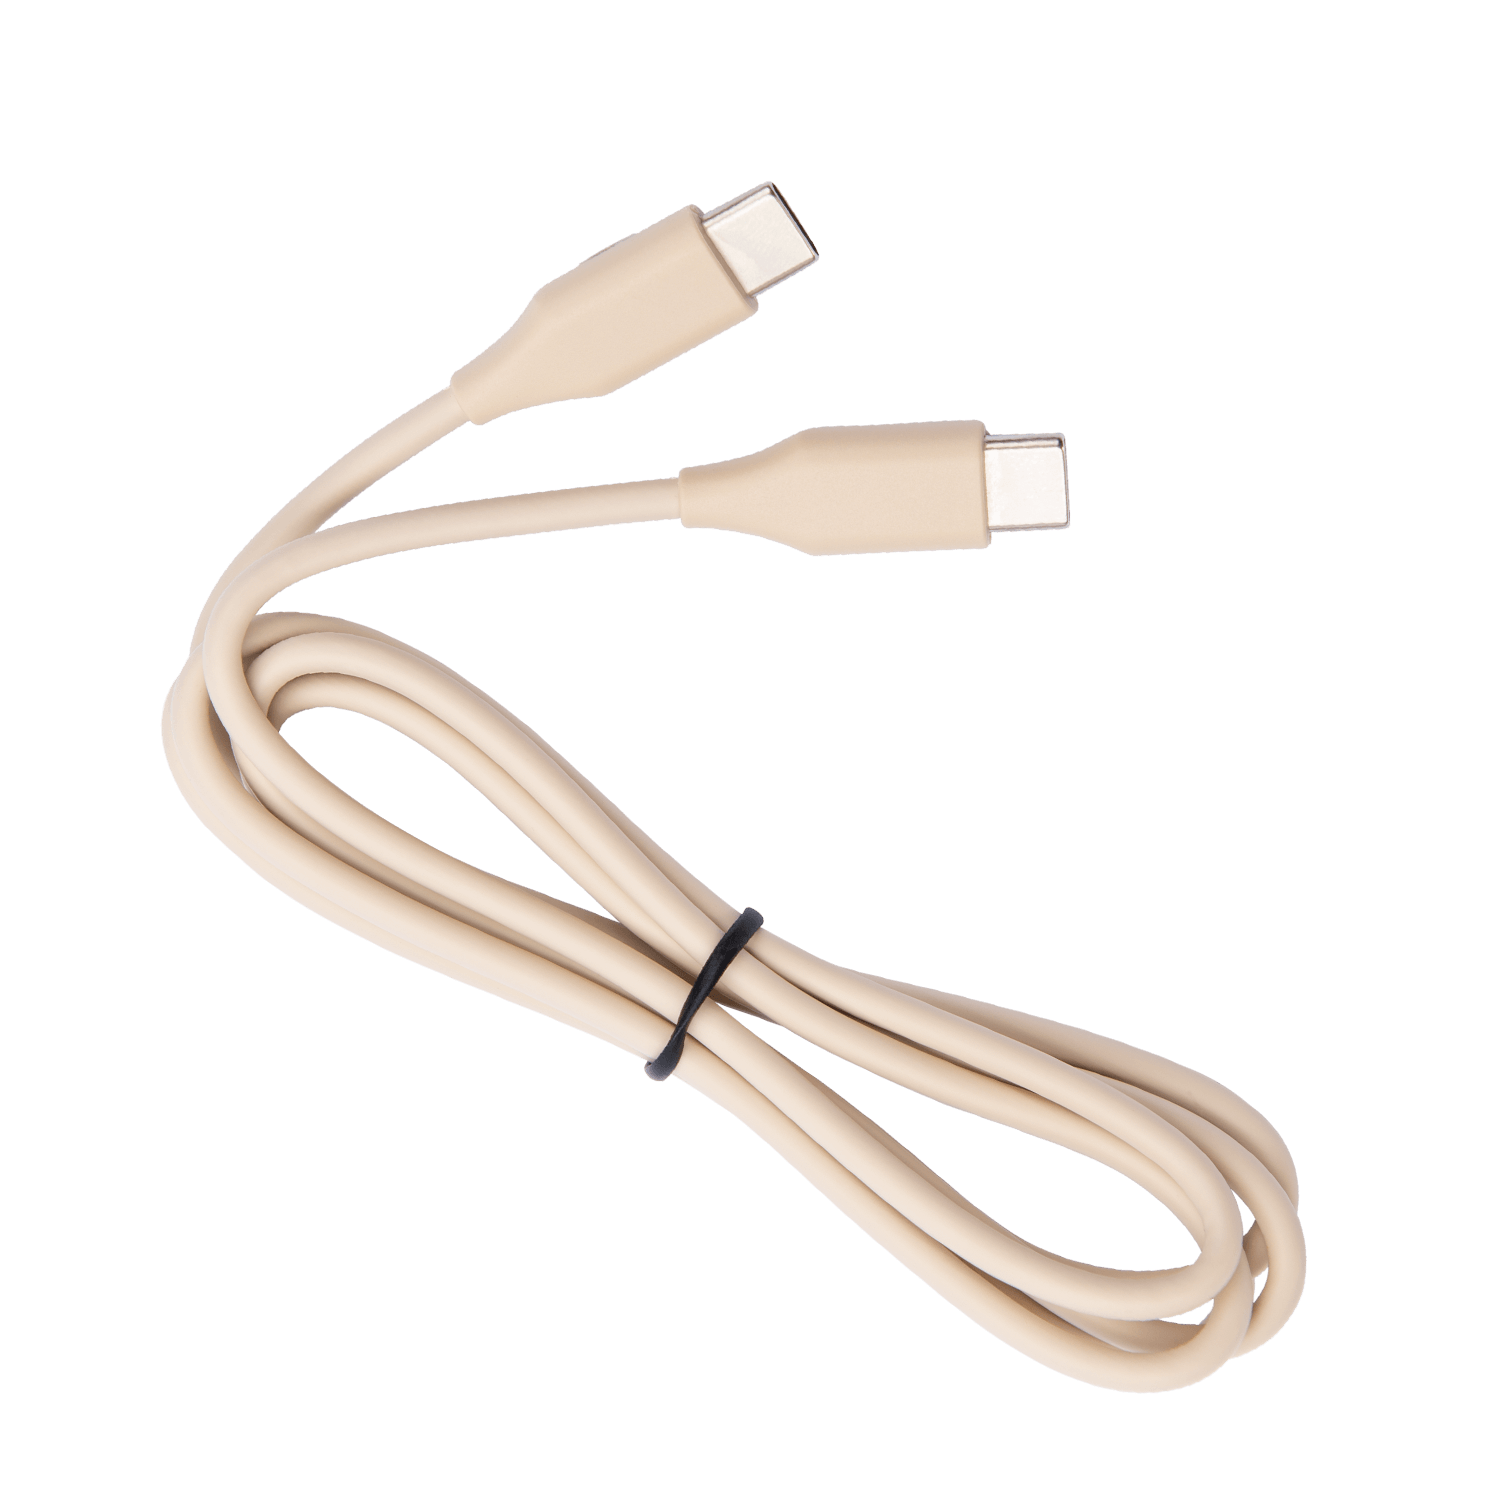 what does the usb cord for a canon vixia that hooks up to a mac computer look like